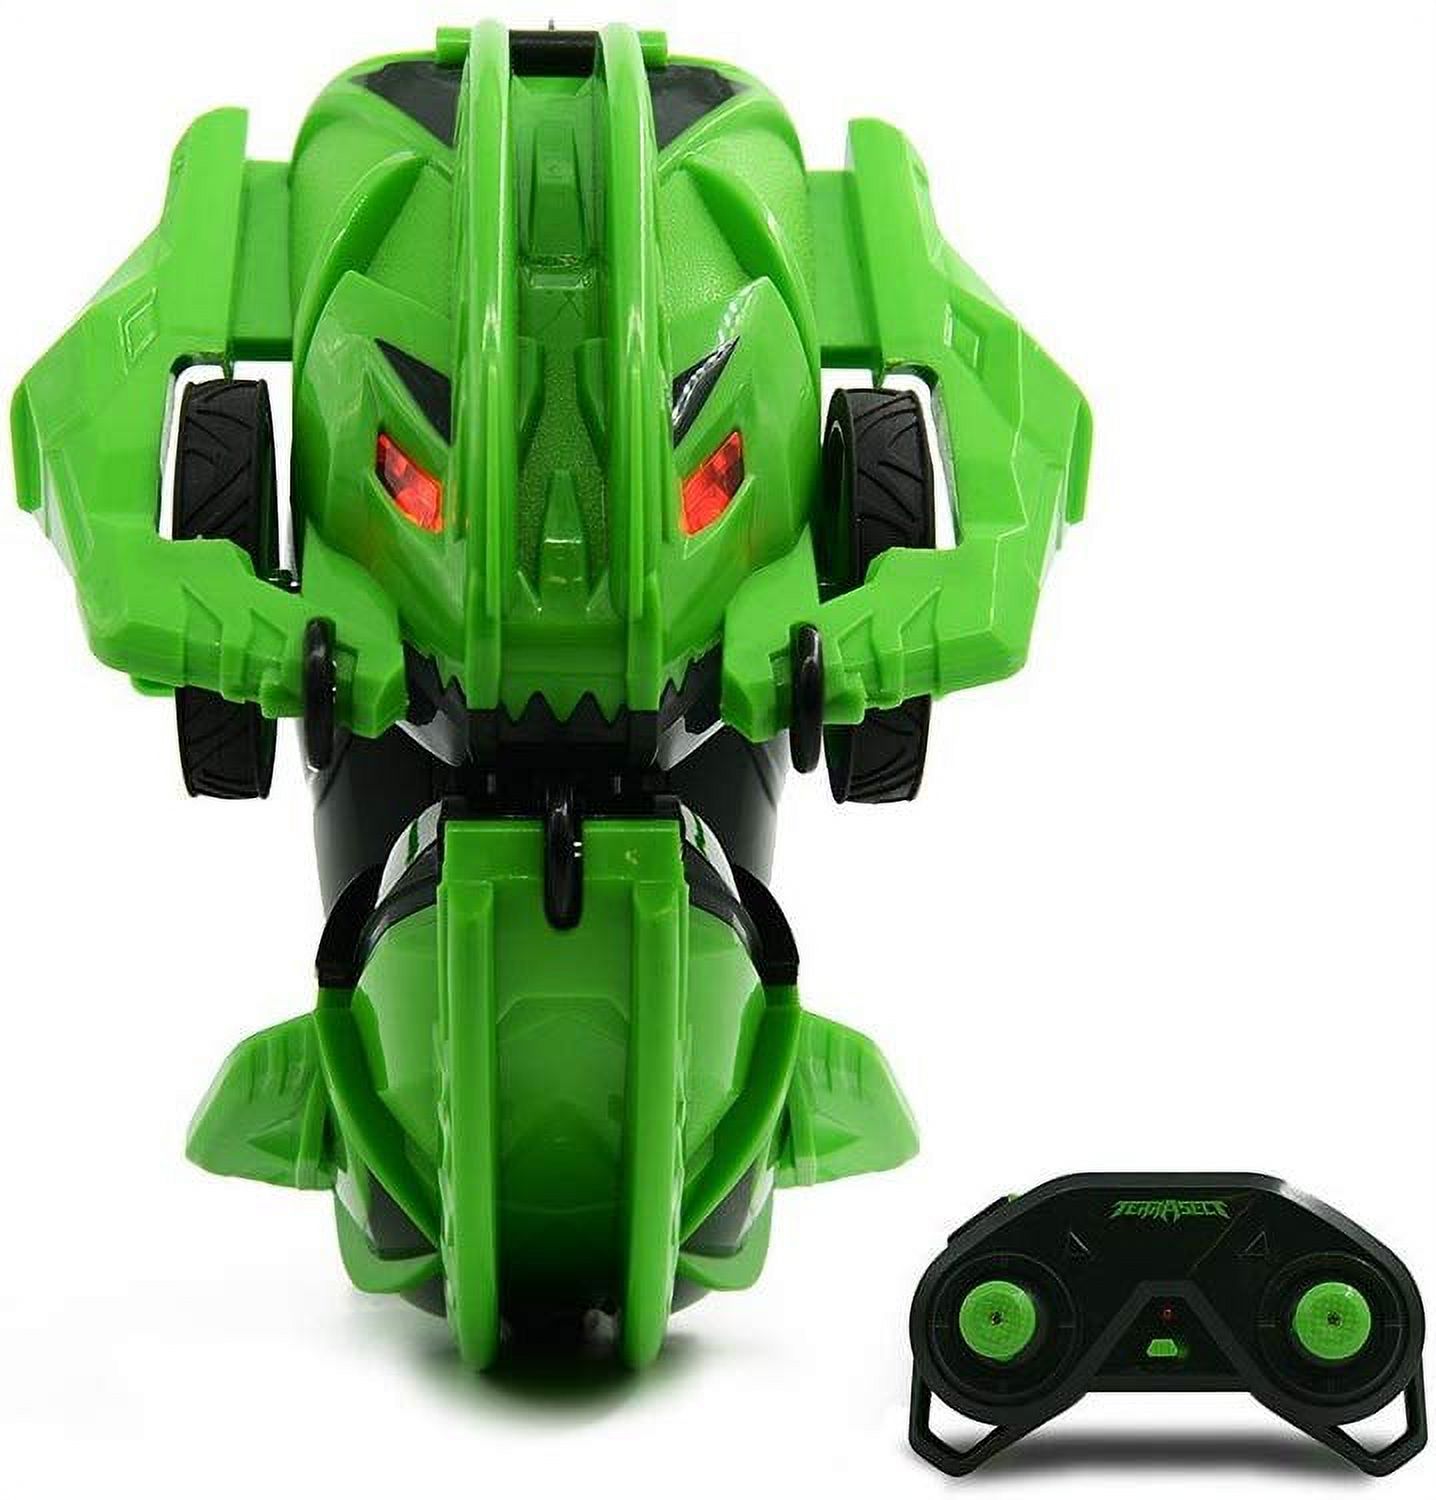 Terrasect Remote Control Transforming Vehicle, Green, 2.4 Ghz - image 3 of 9